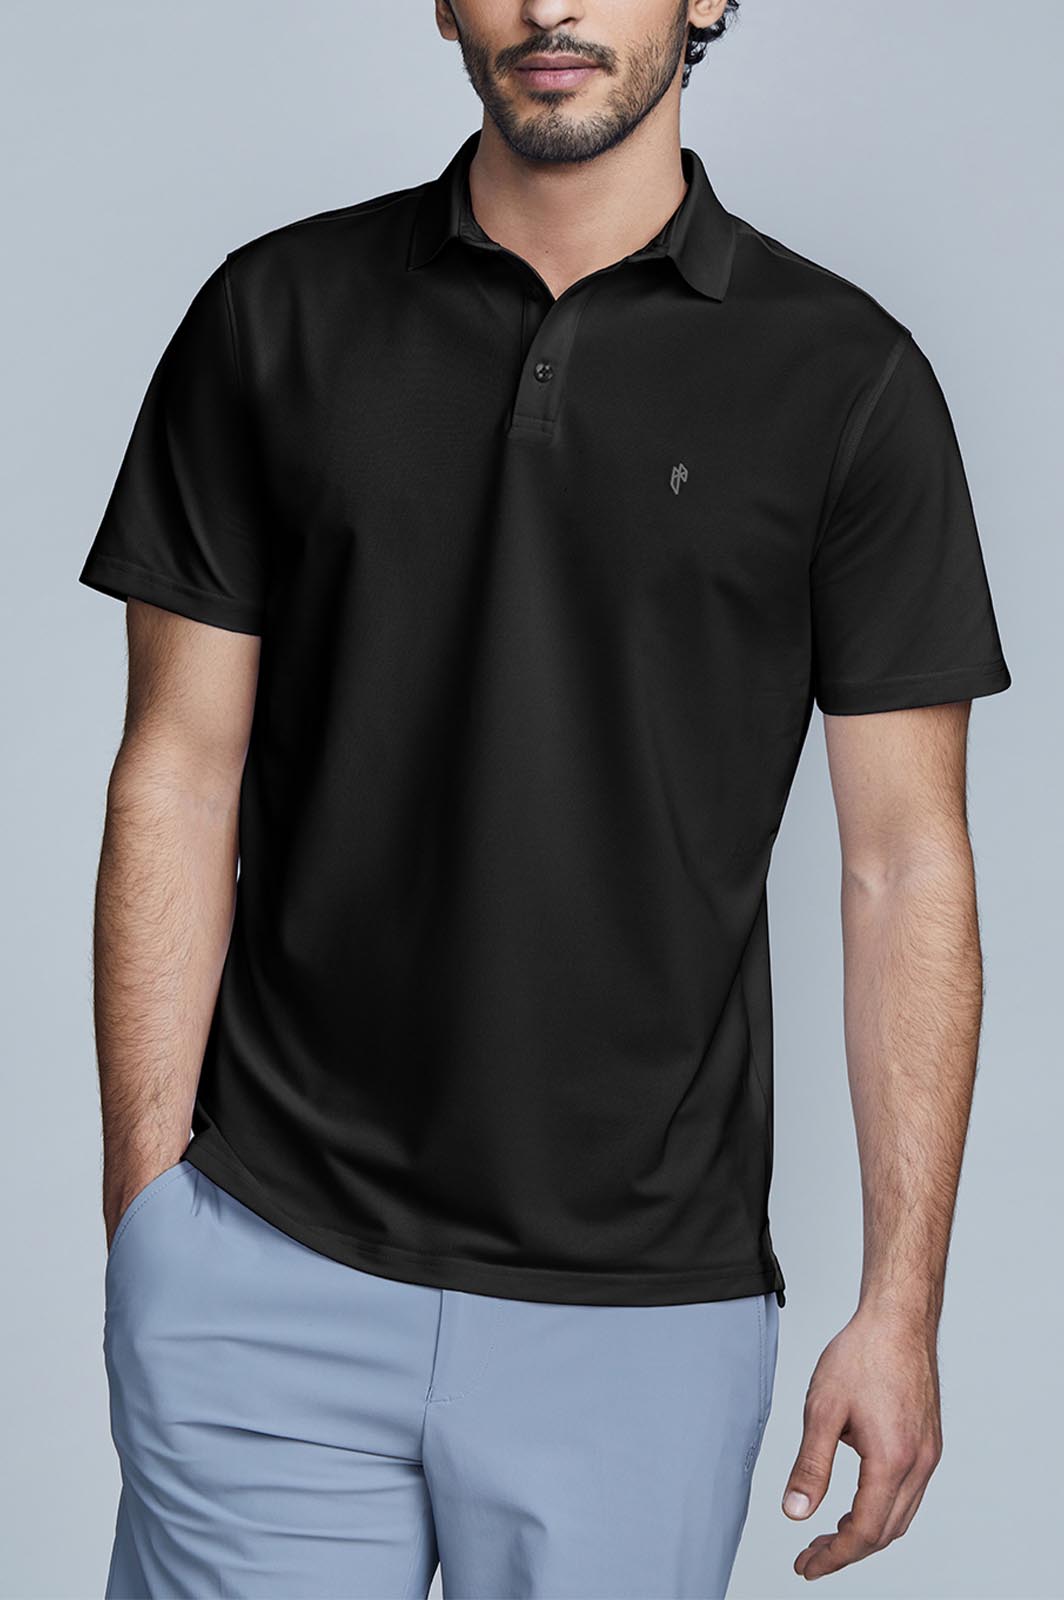 Sustainable Men's Black Slim Fit Polo Shirt - State Matter Apparel